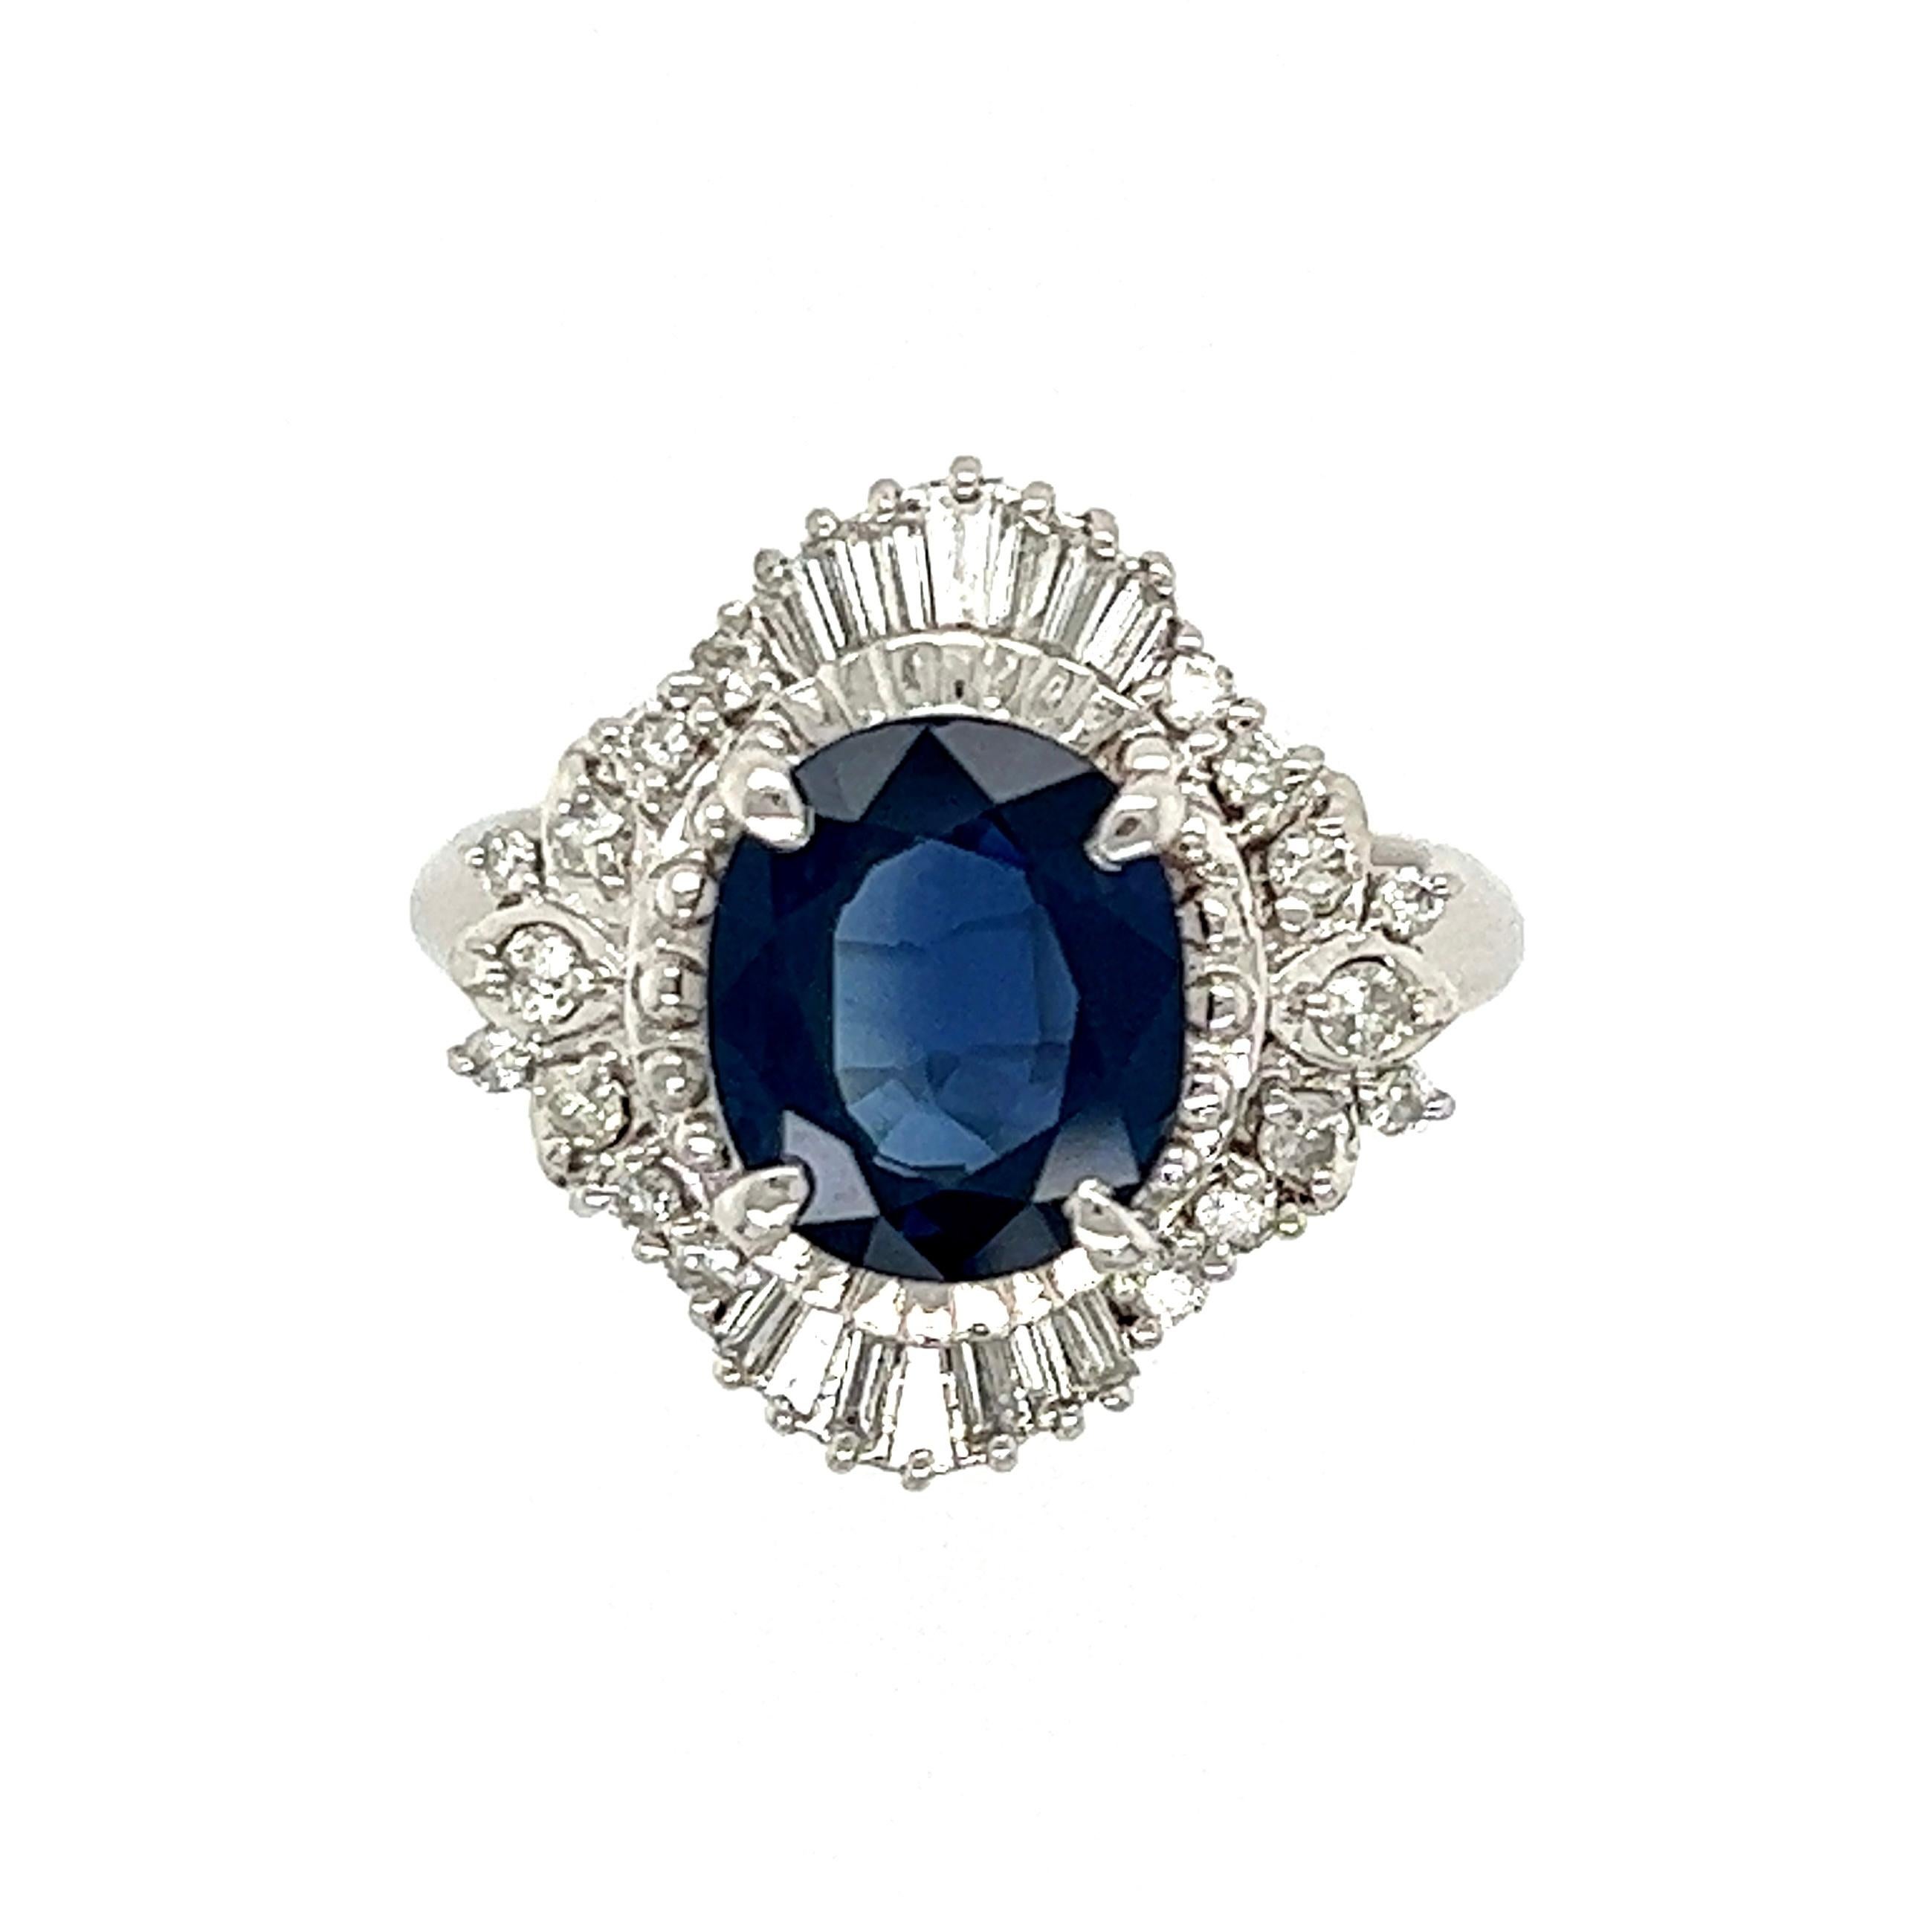 2.84 Carat Sapphire Diamond Platinum Art Deco Revival Ring Estate Fine Jewelry In Excellent Condition For Sale In Montreal, QC